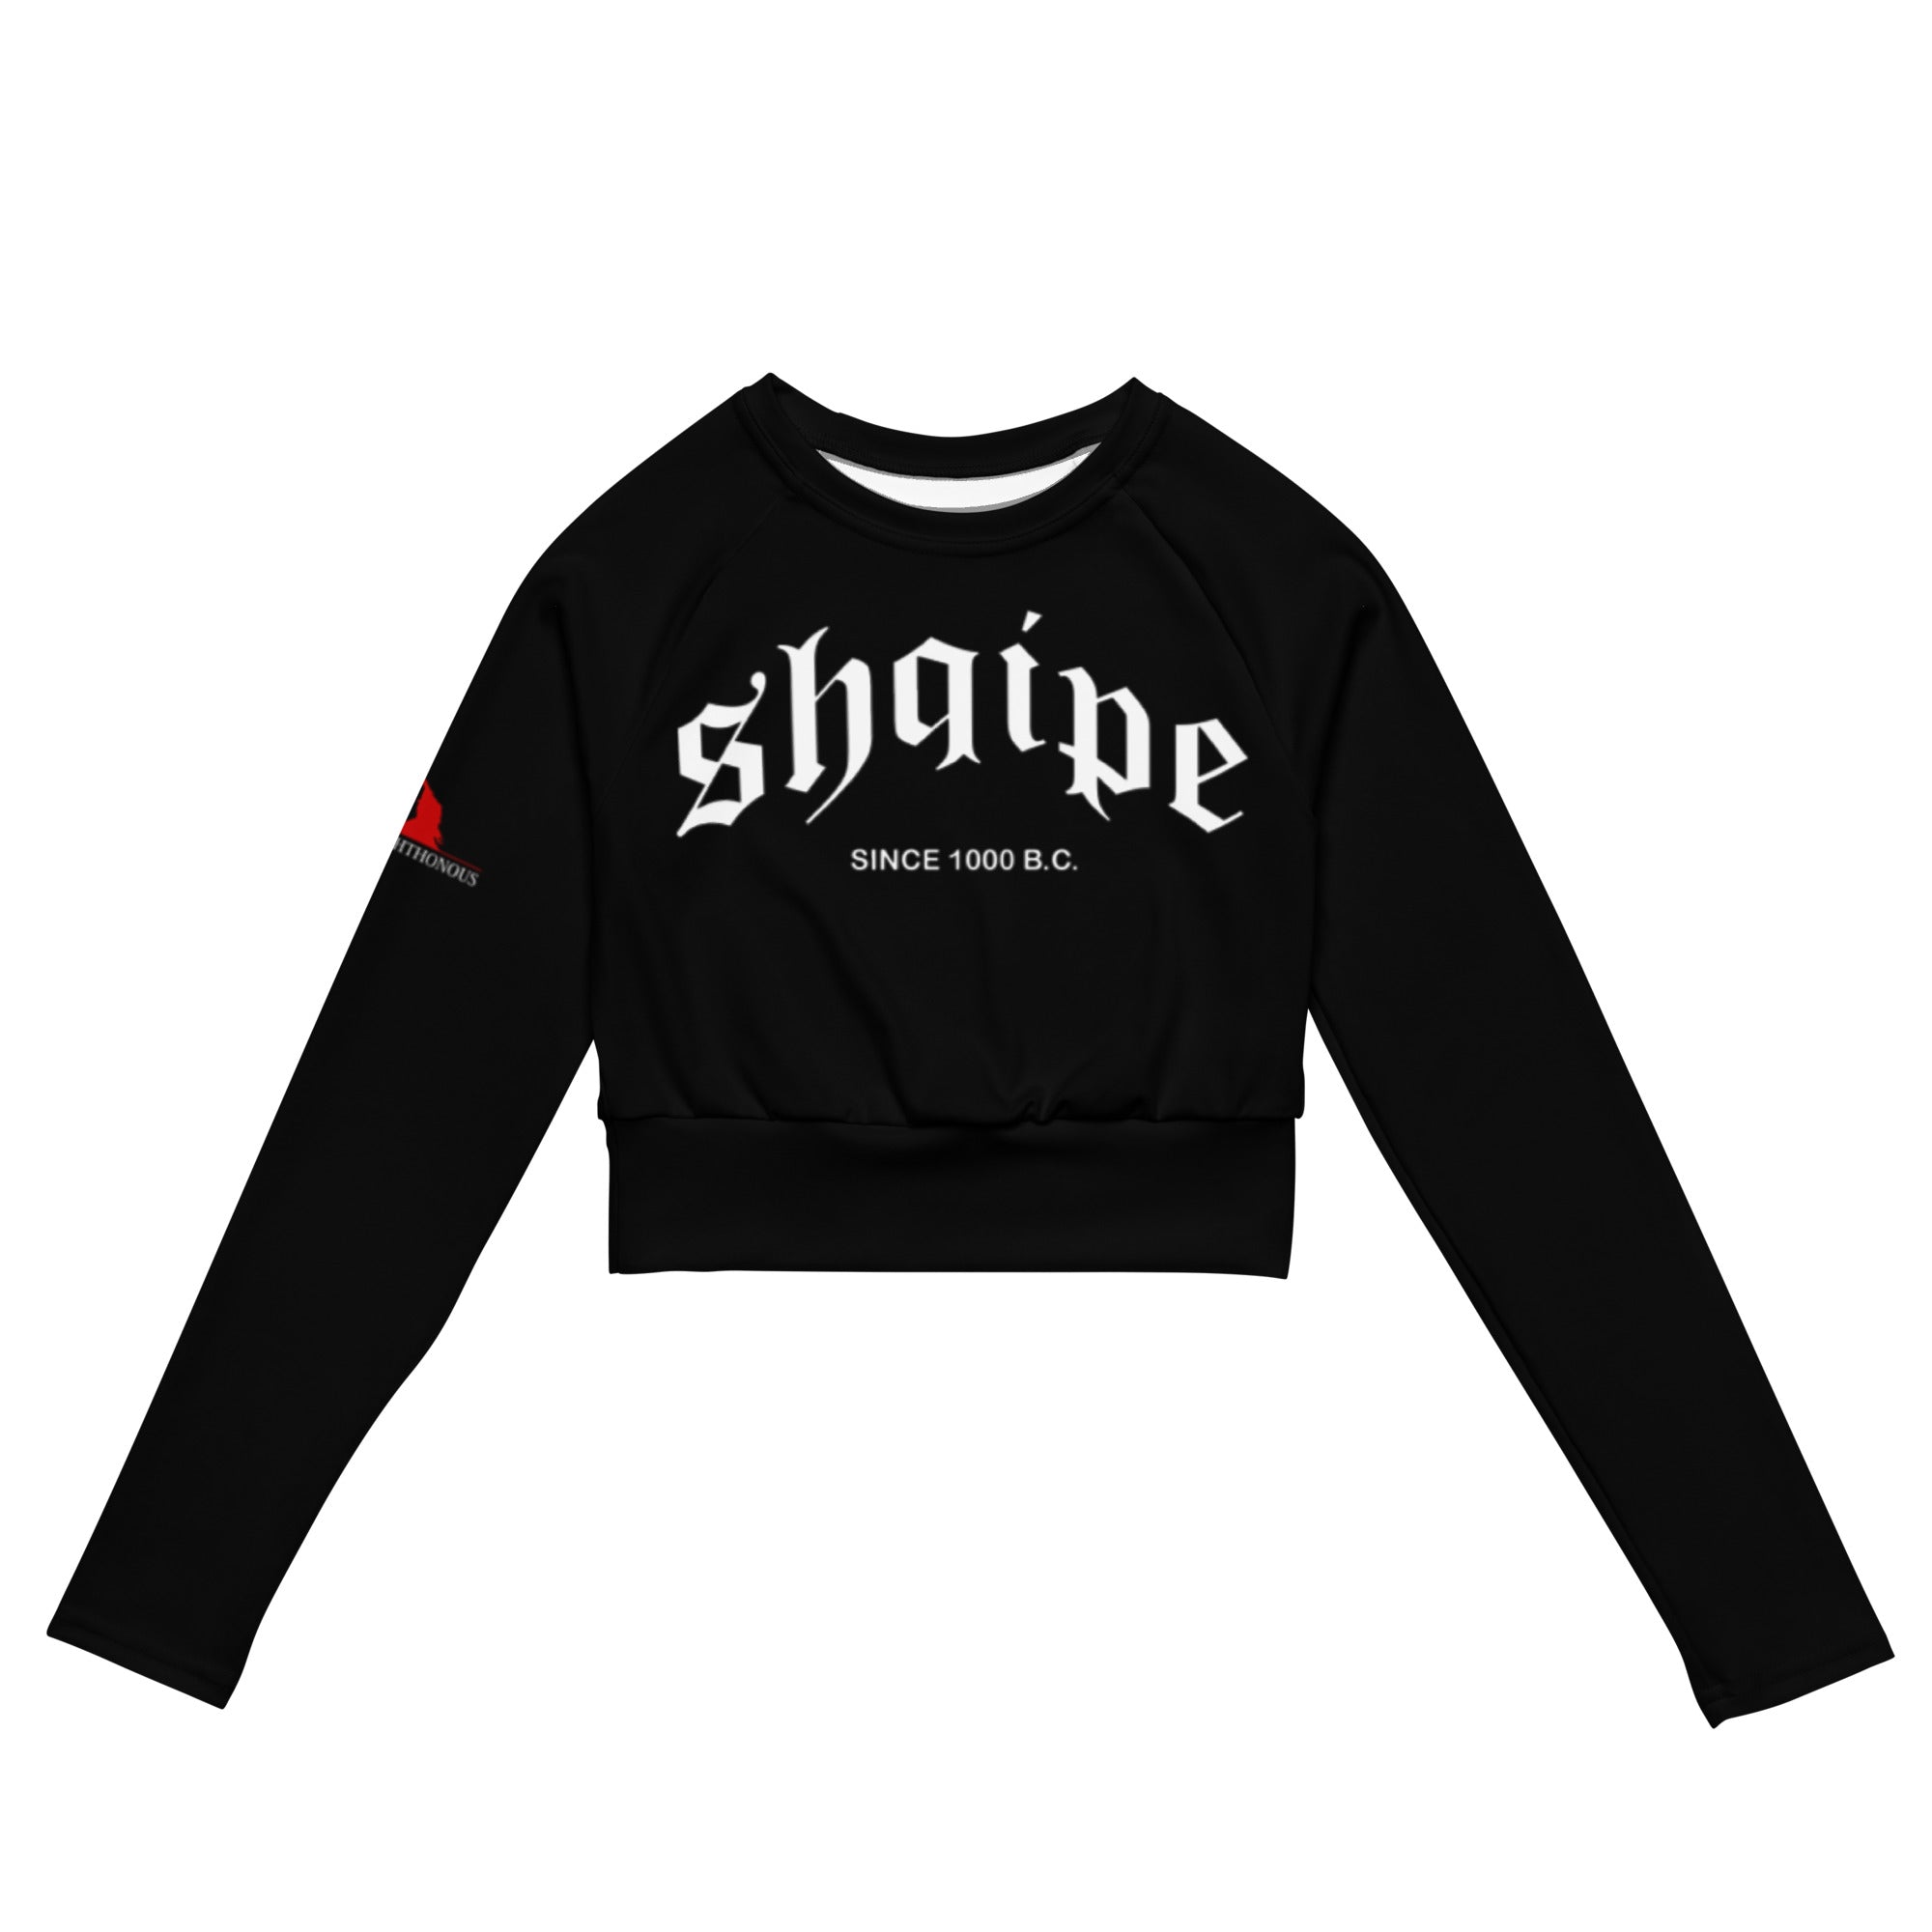 Albanian Recycled long-sleeve crop top